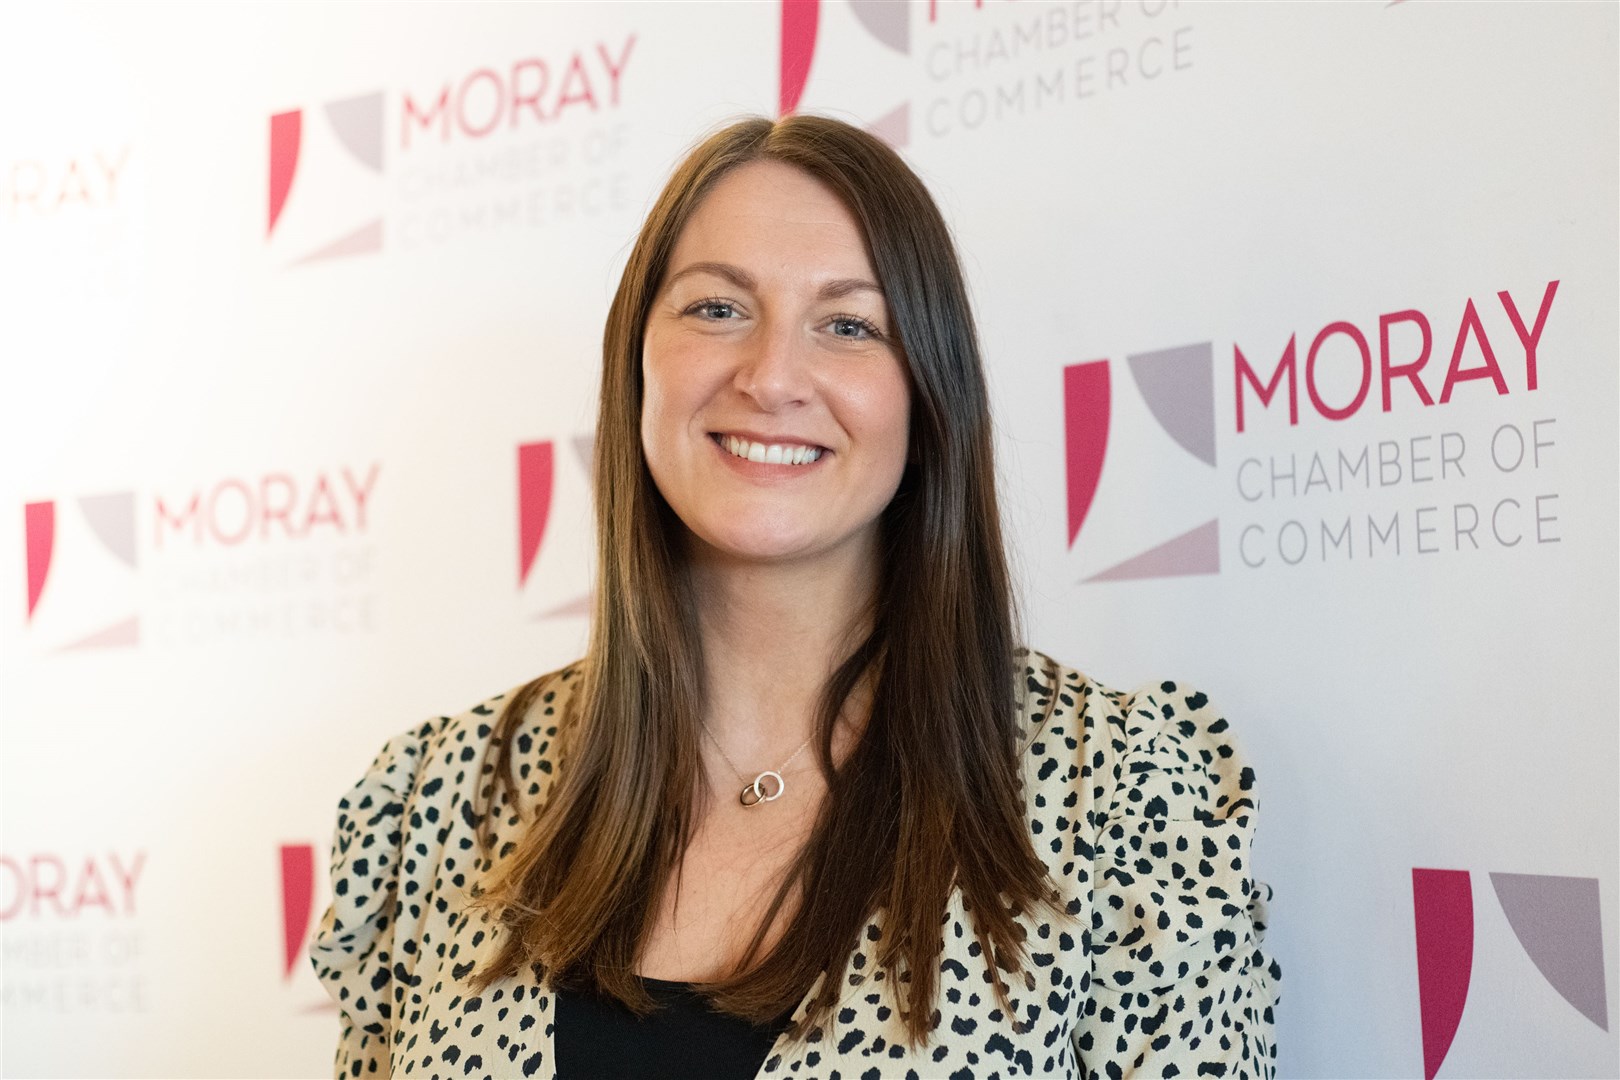 Chief Executive Officer of Moray Chamber of Commerce Sarah Medcraf.